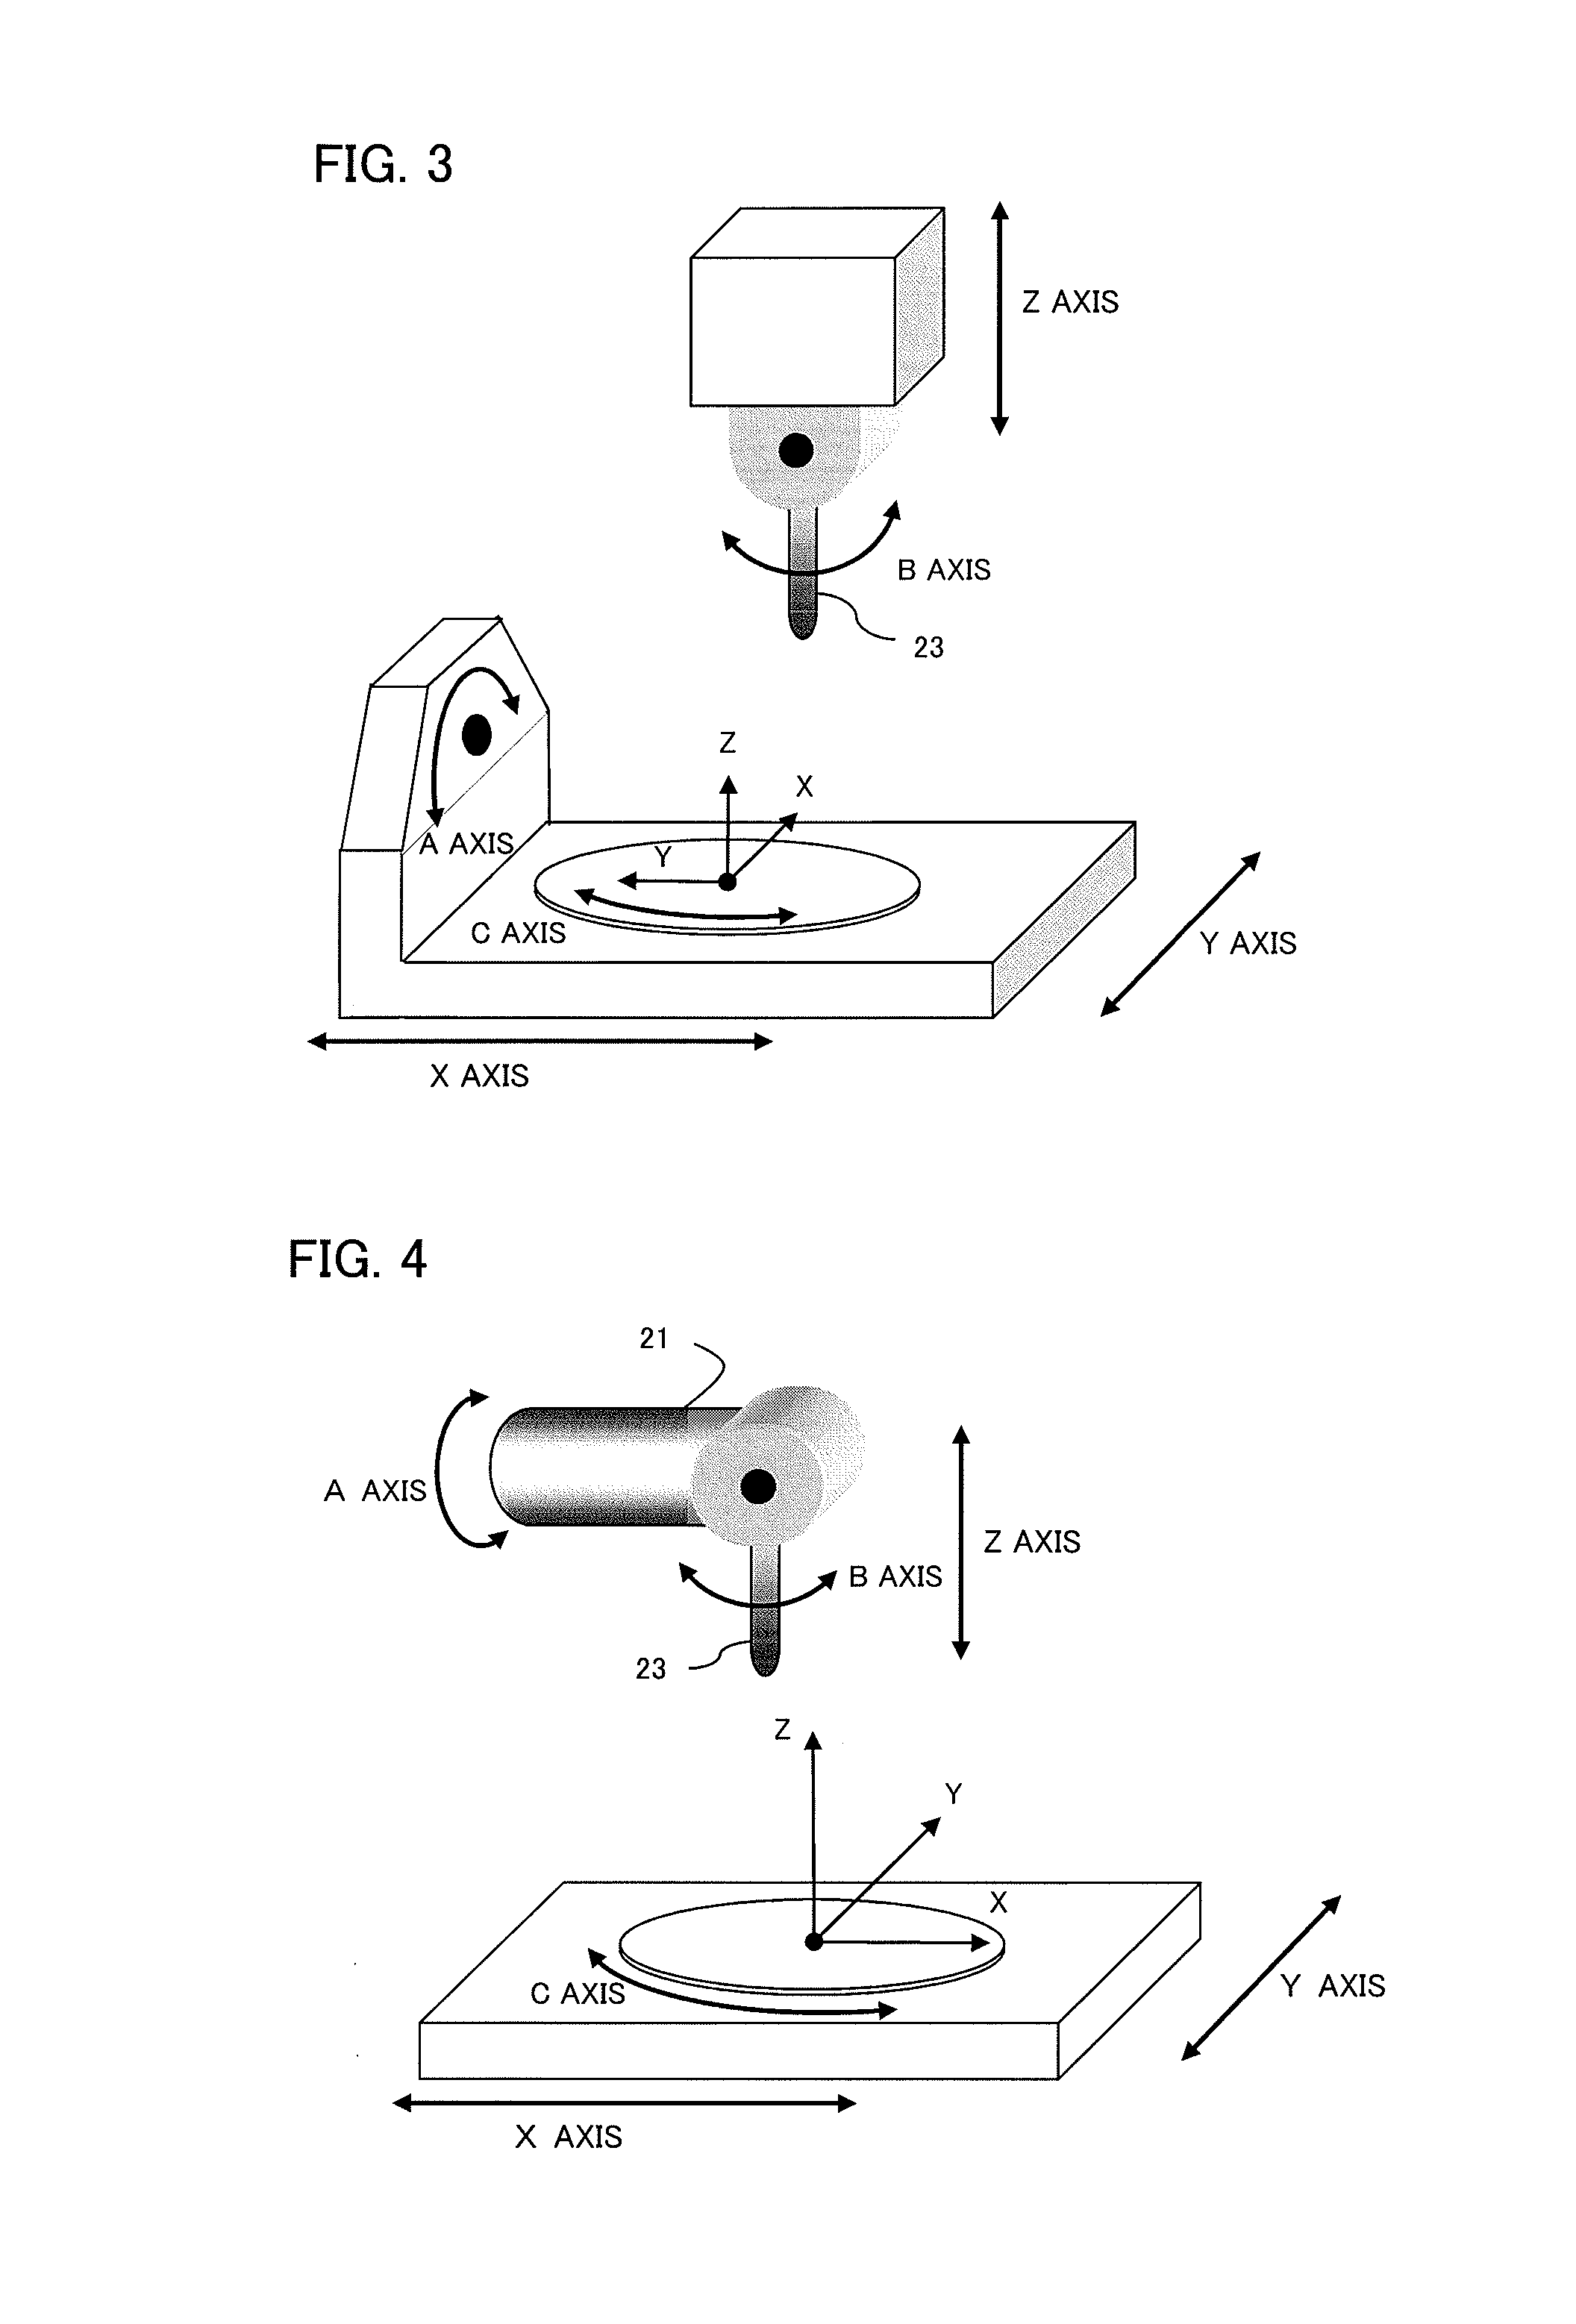 Numerical controller with workpiece setting error compensation unit for multi-axis machine tool